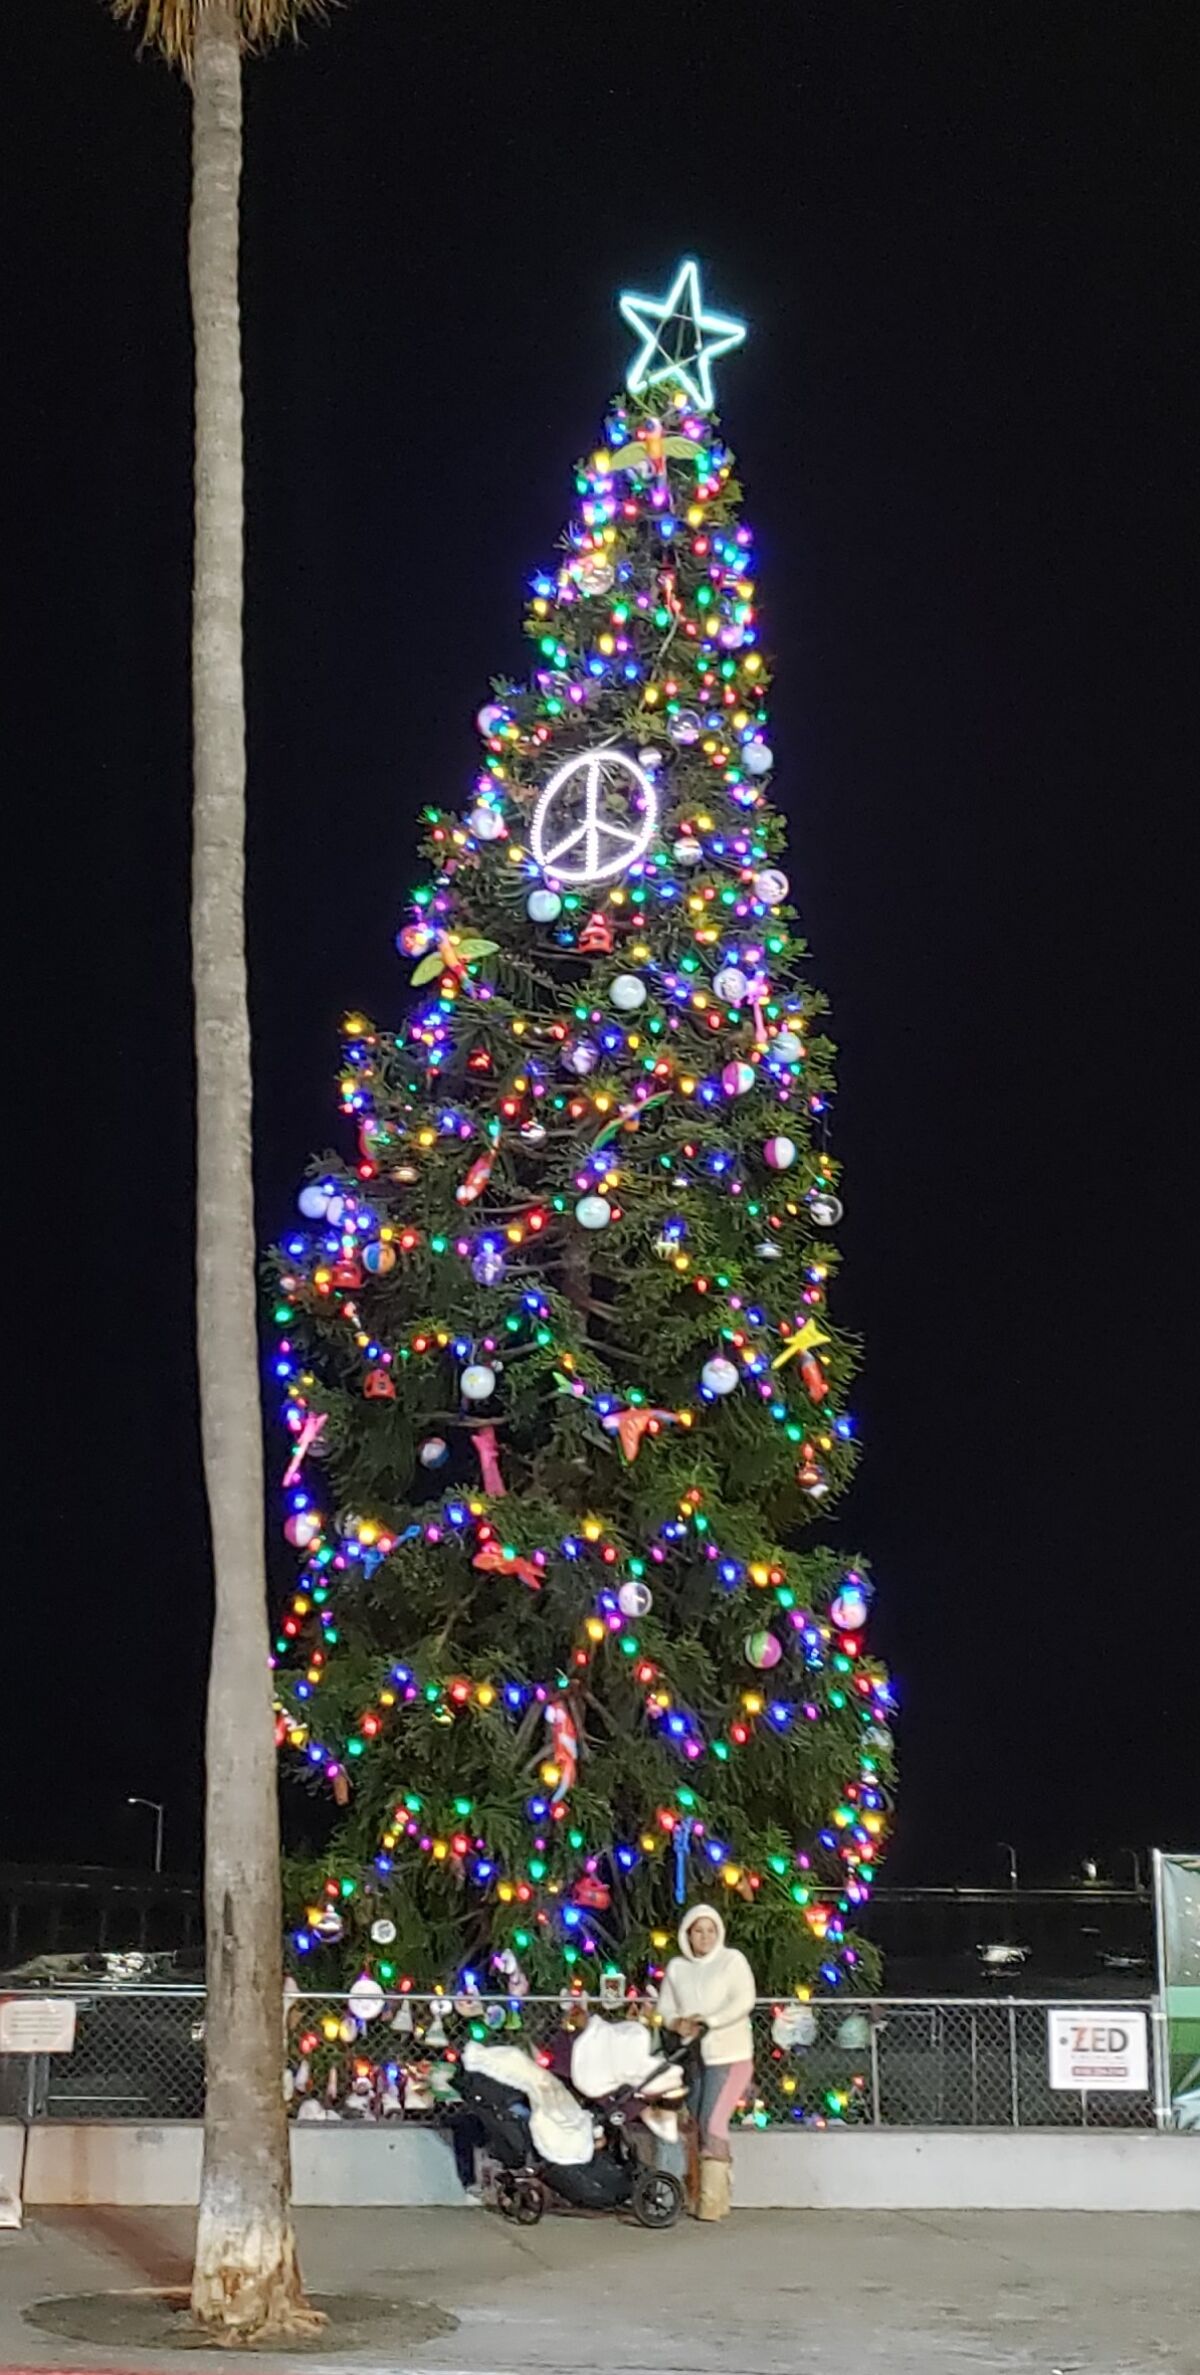 The 2019 OB Christmas Tree stands proud on the beach at the pier.